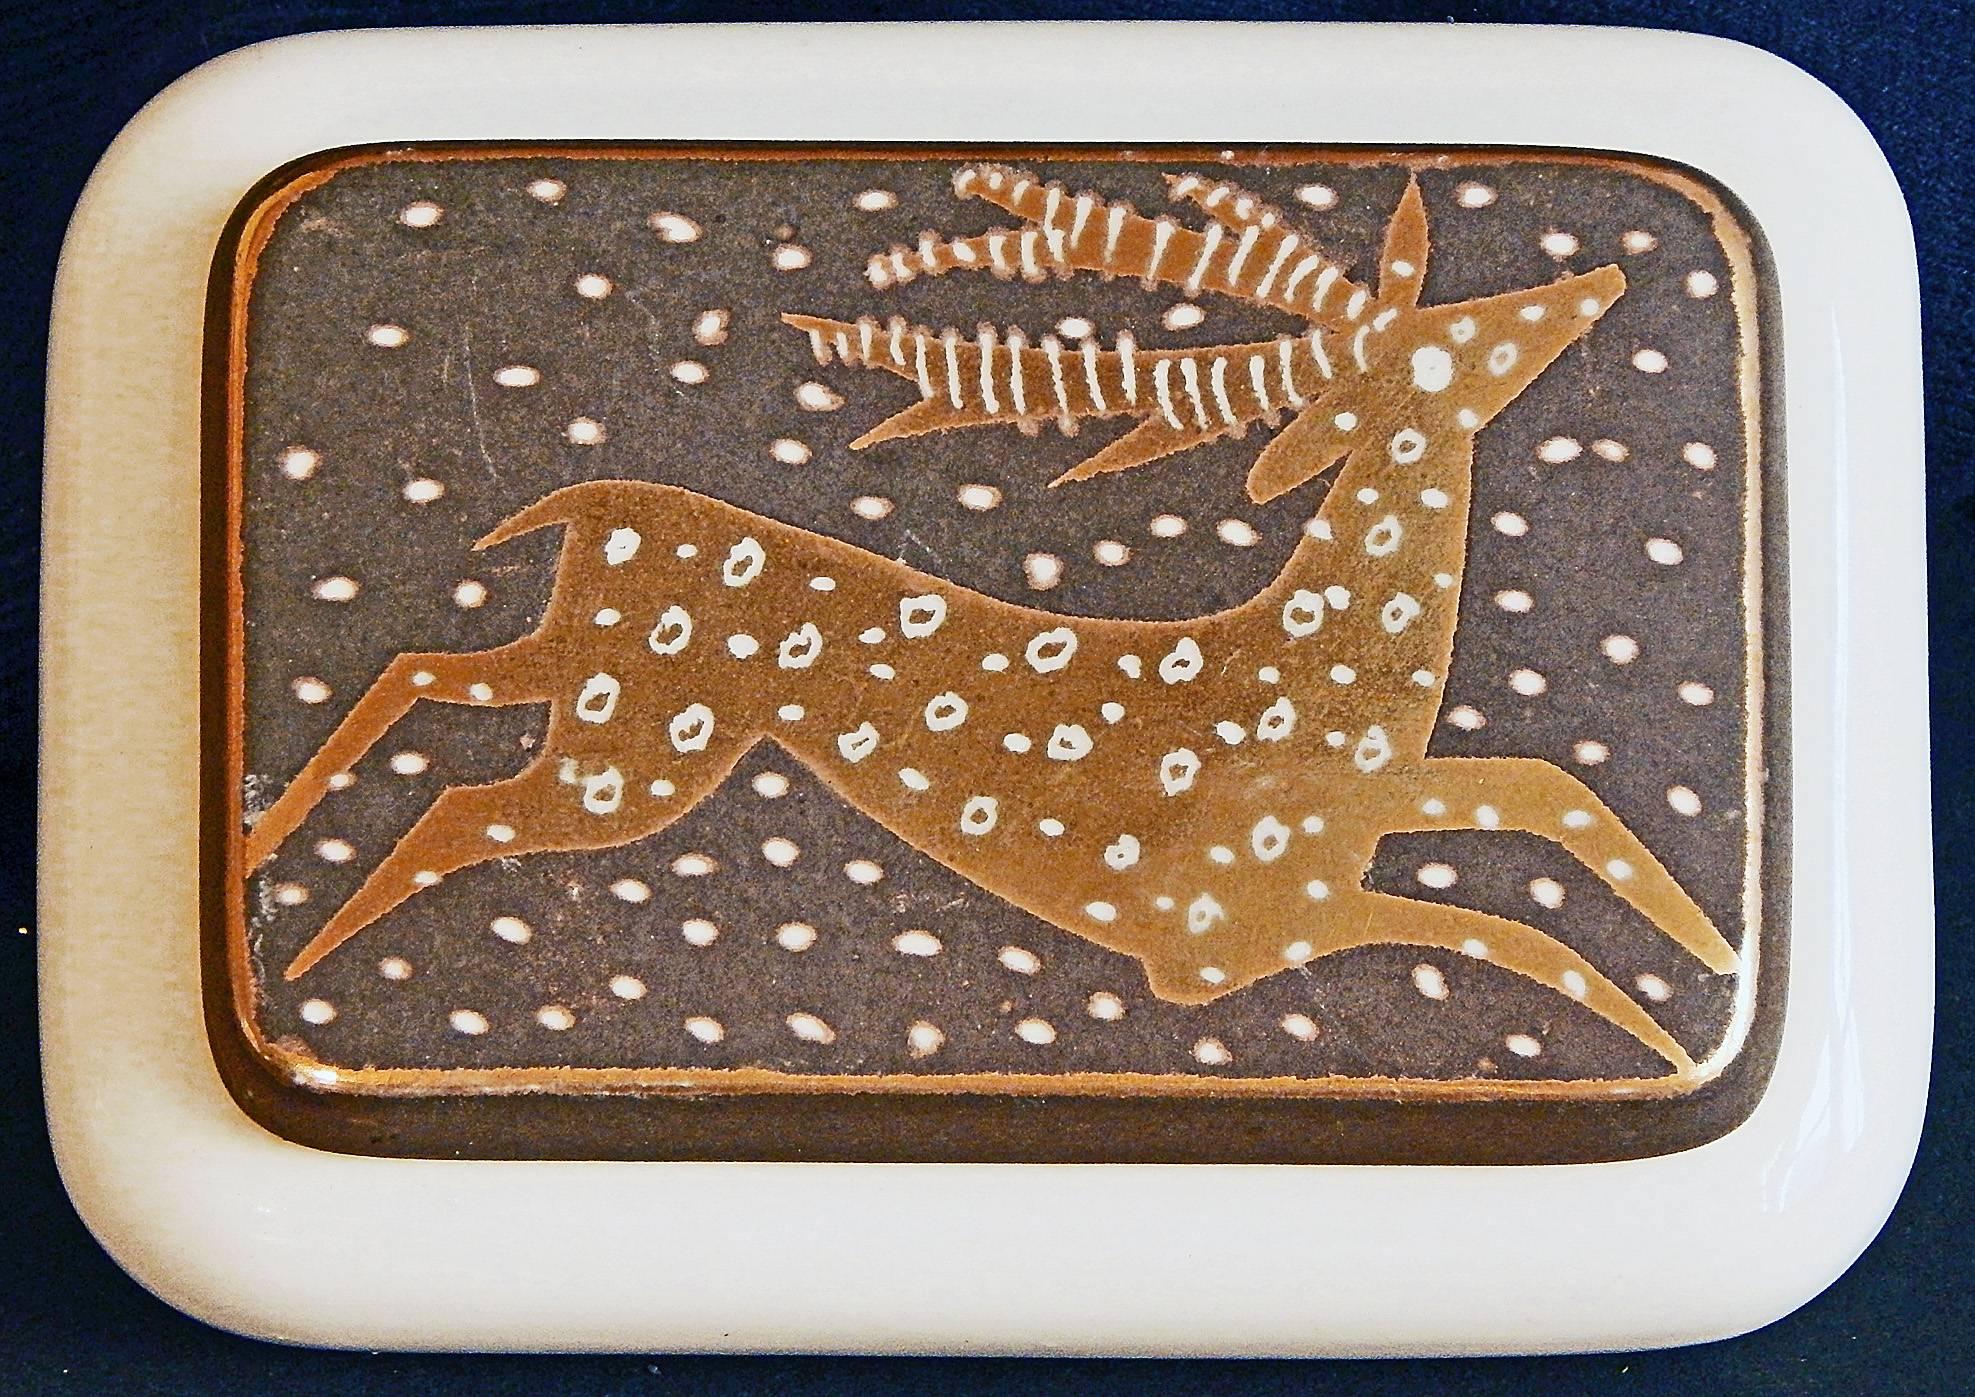 Gorgeously glazed in tones of gold and warm, dark gray, this lidded ceramic box depicts a leaping deer on its cover, the spots on its fur echoed by the large snowflakes in the air. The artist, Waylande Gregory, was a renowned WPA sculptor and